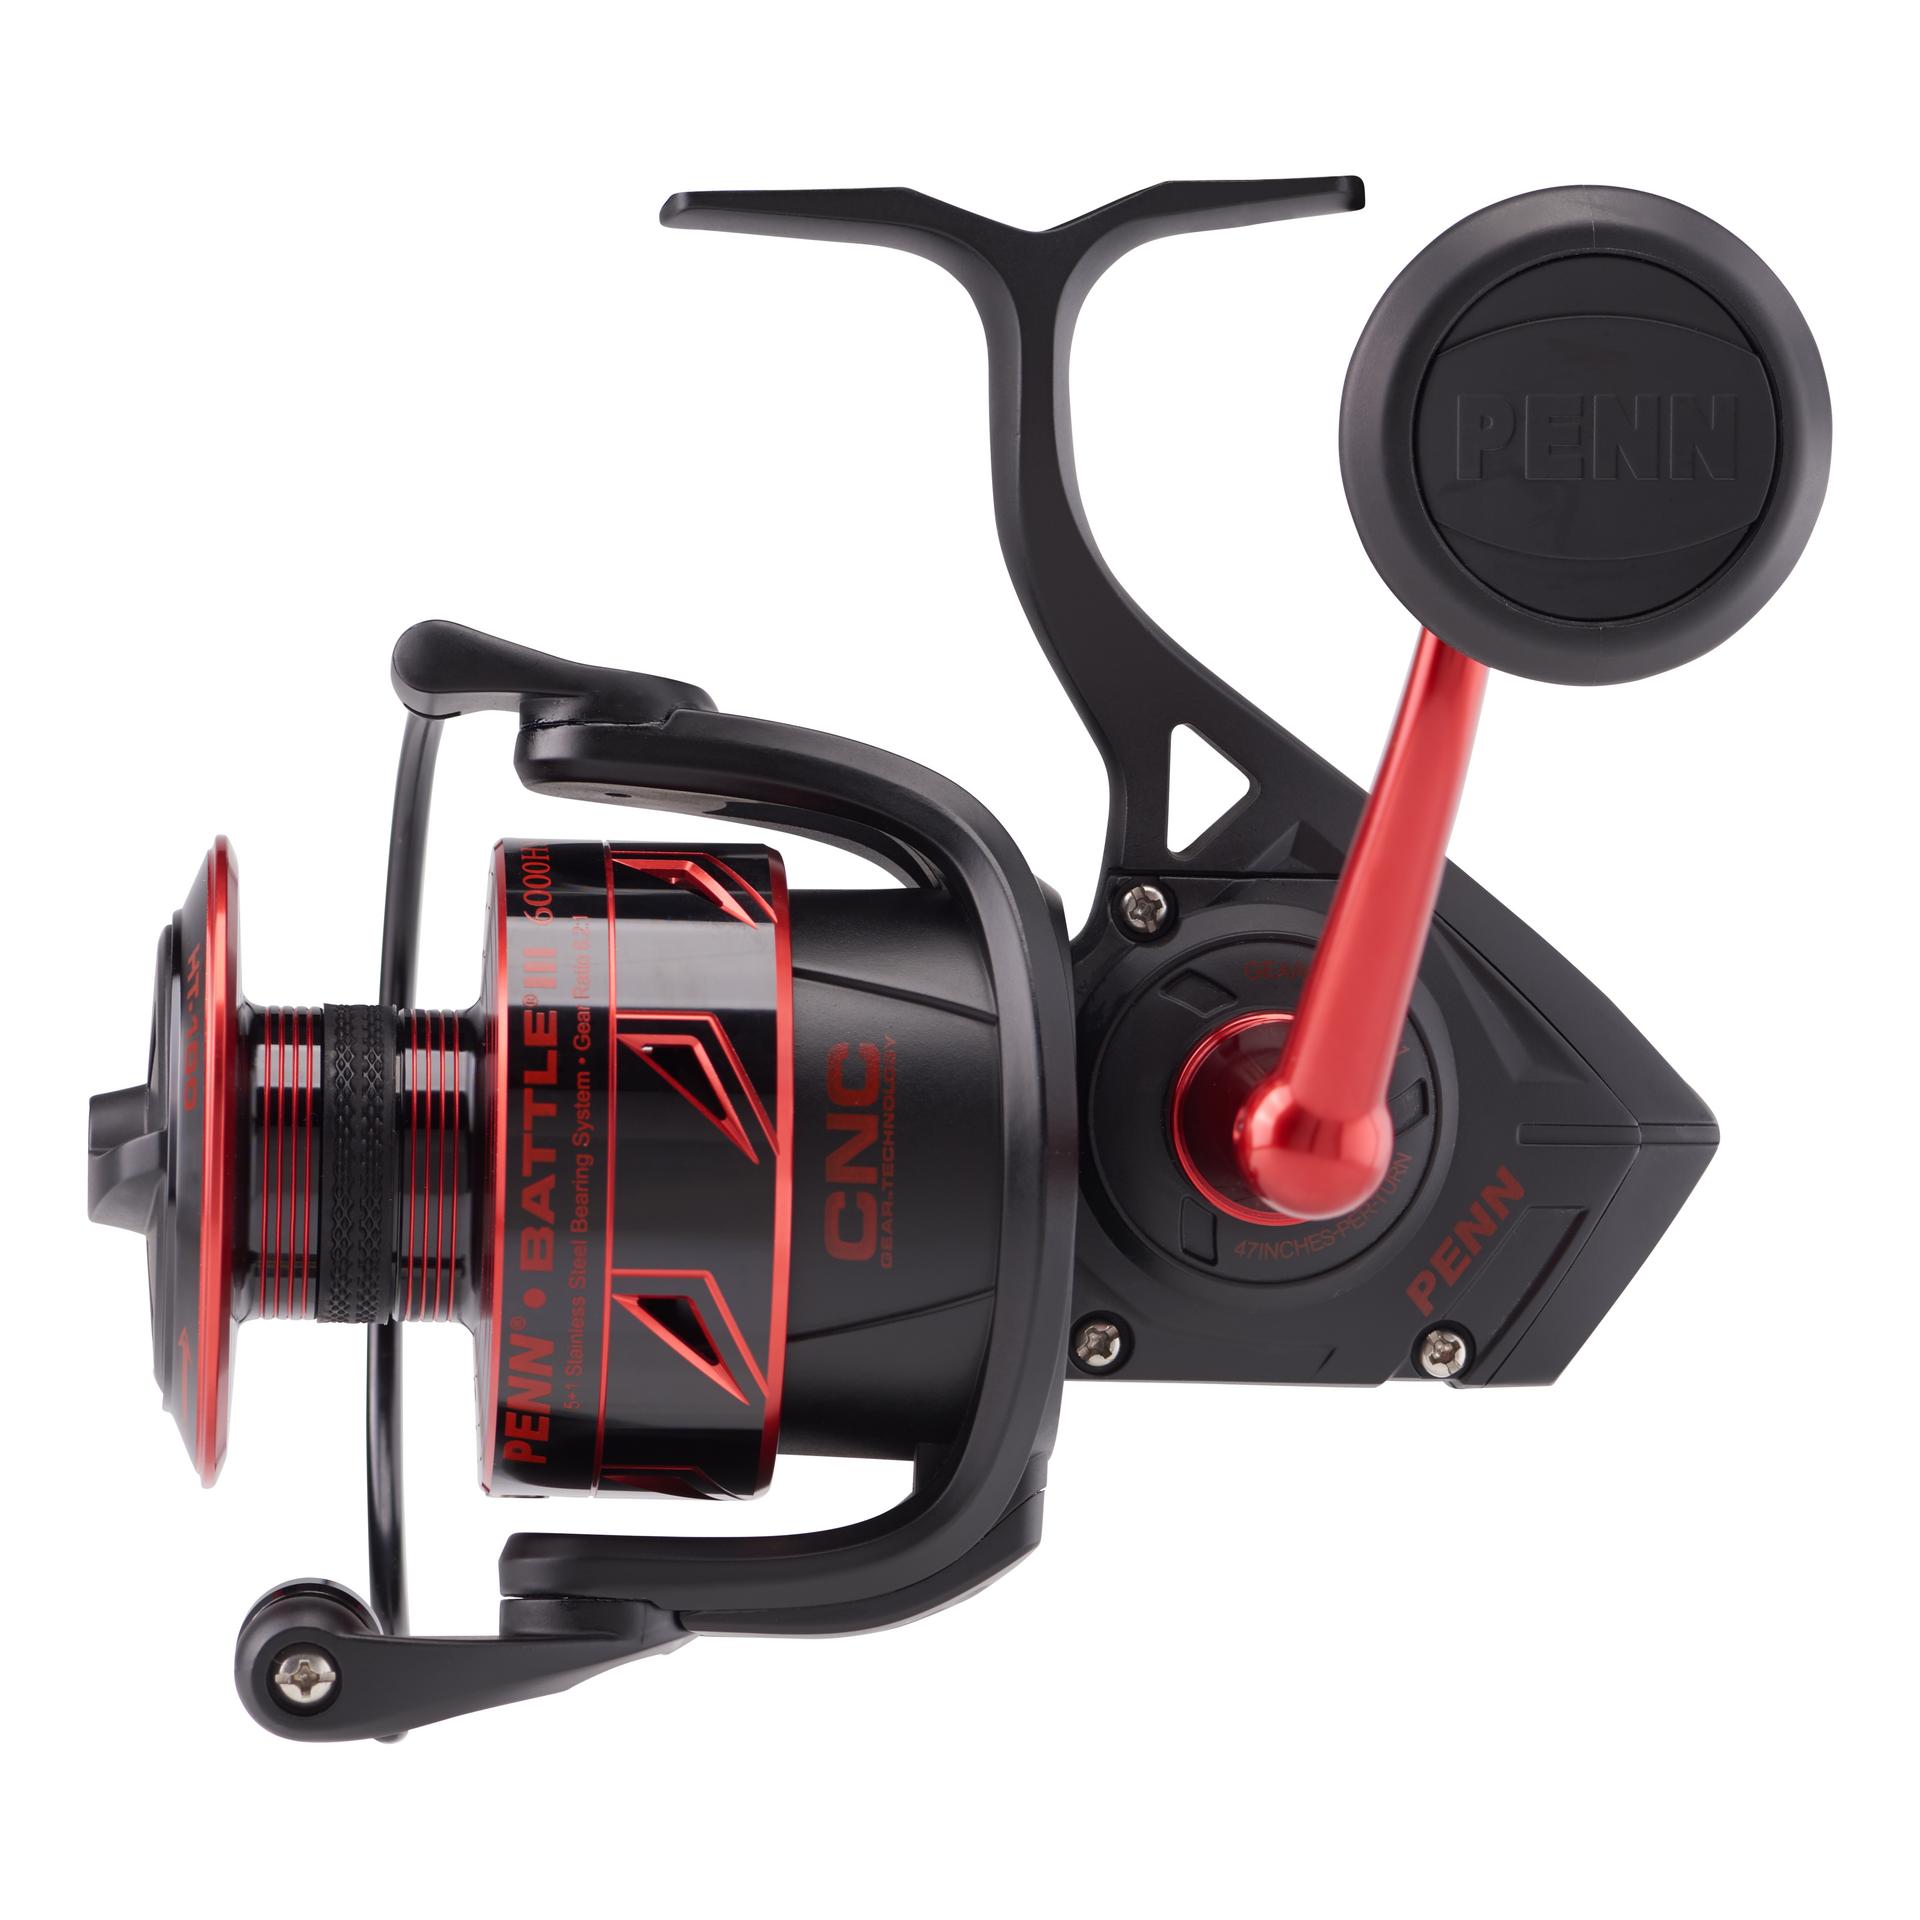 Full metal Spinning fishing reel with 60 pounds braided line 8